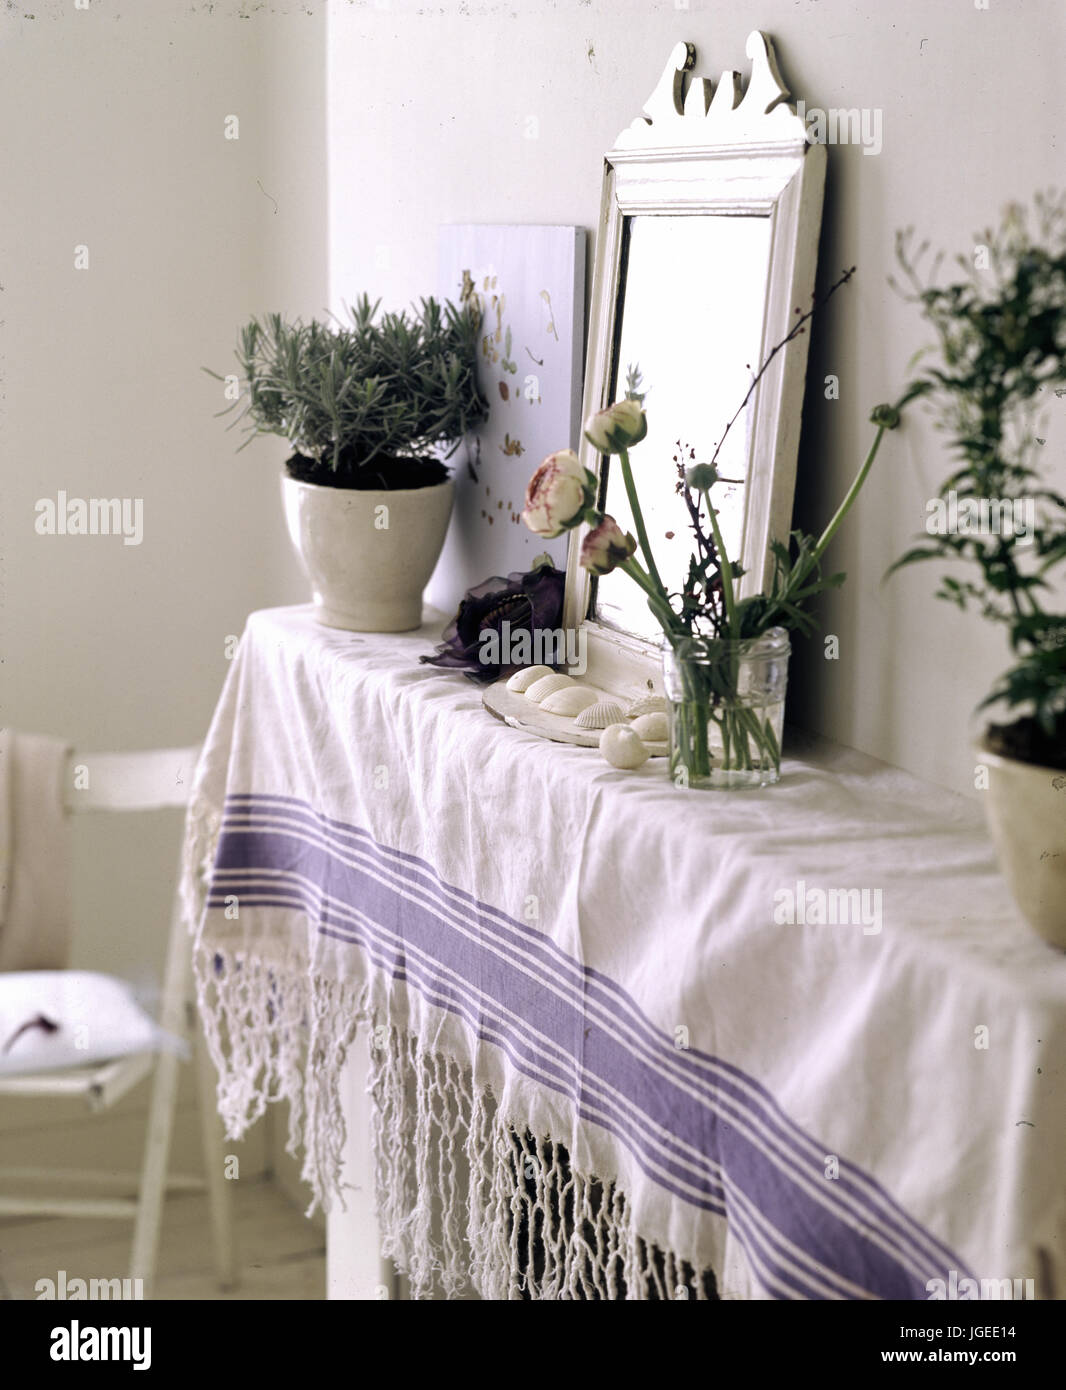 Closeup of a mirror and houseplants on mantlepiece draped with fringed shawl Stock Photo